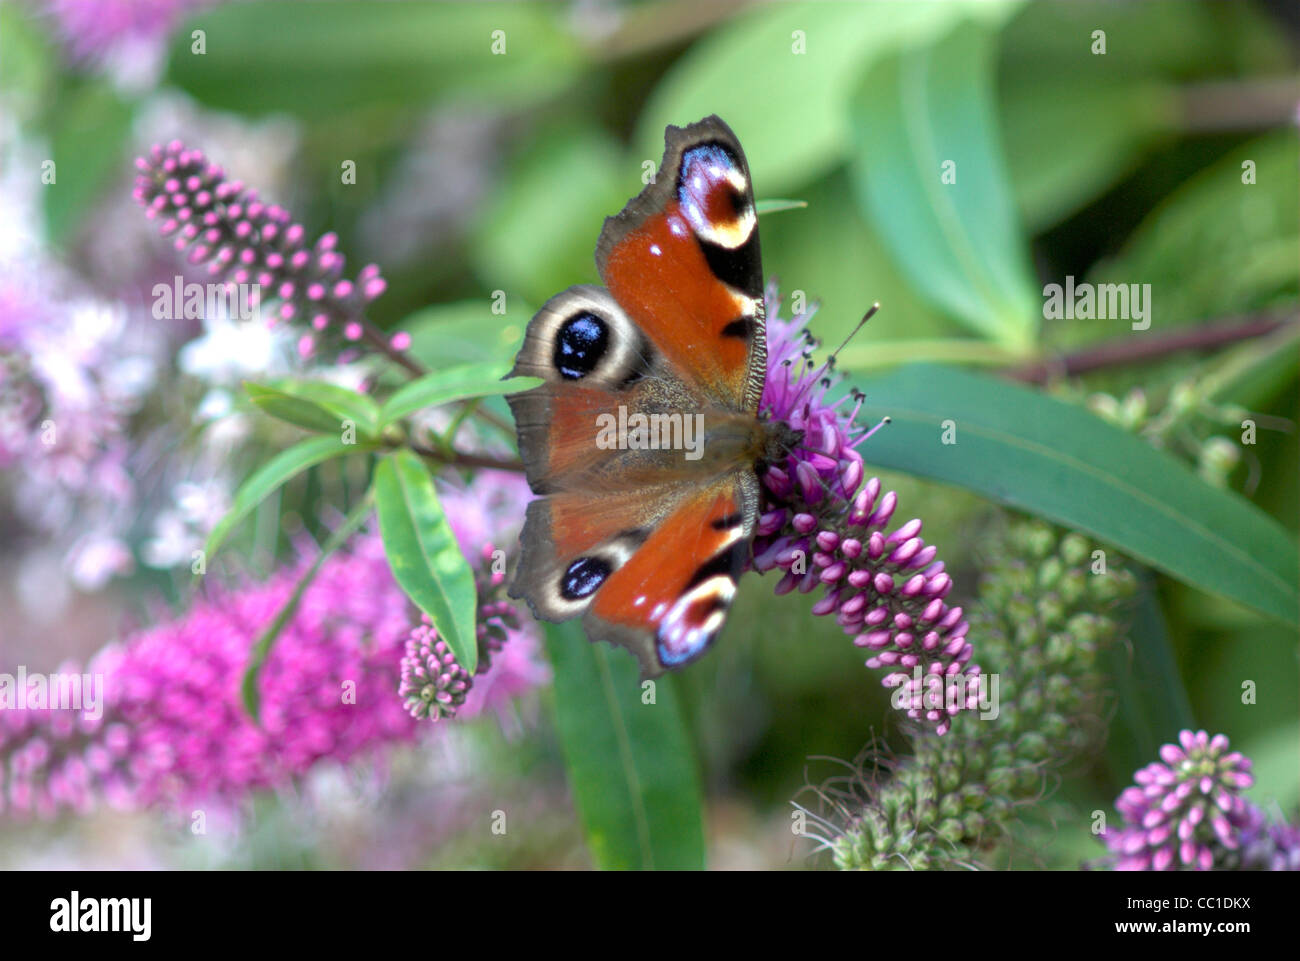 A peacock butterfly at rest on a hebe shrub UK Stock Photo